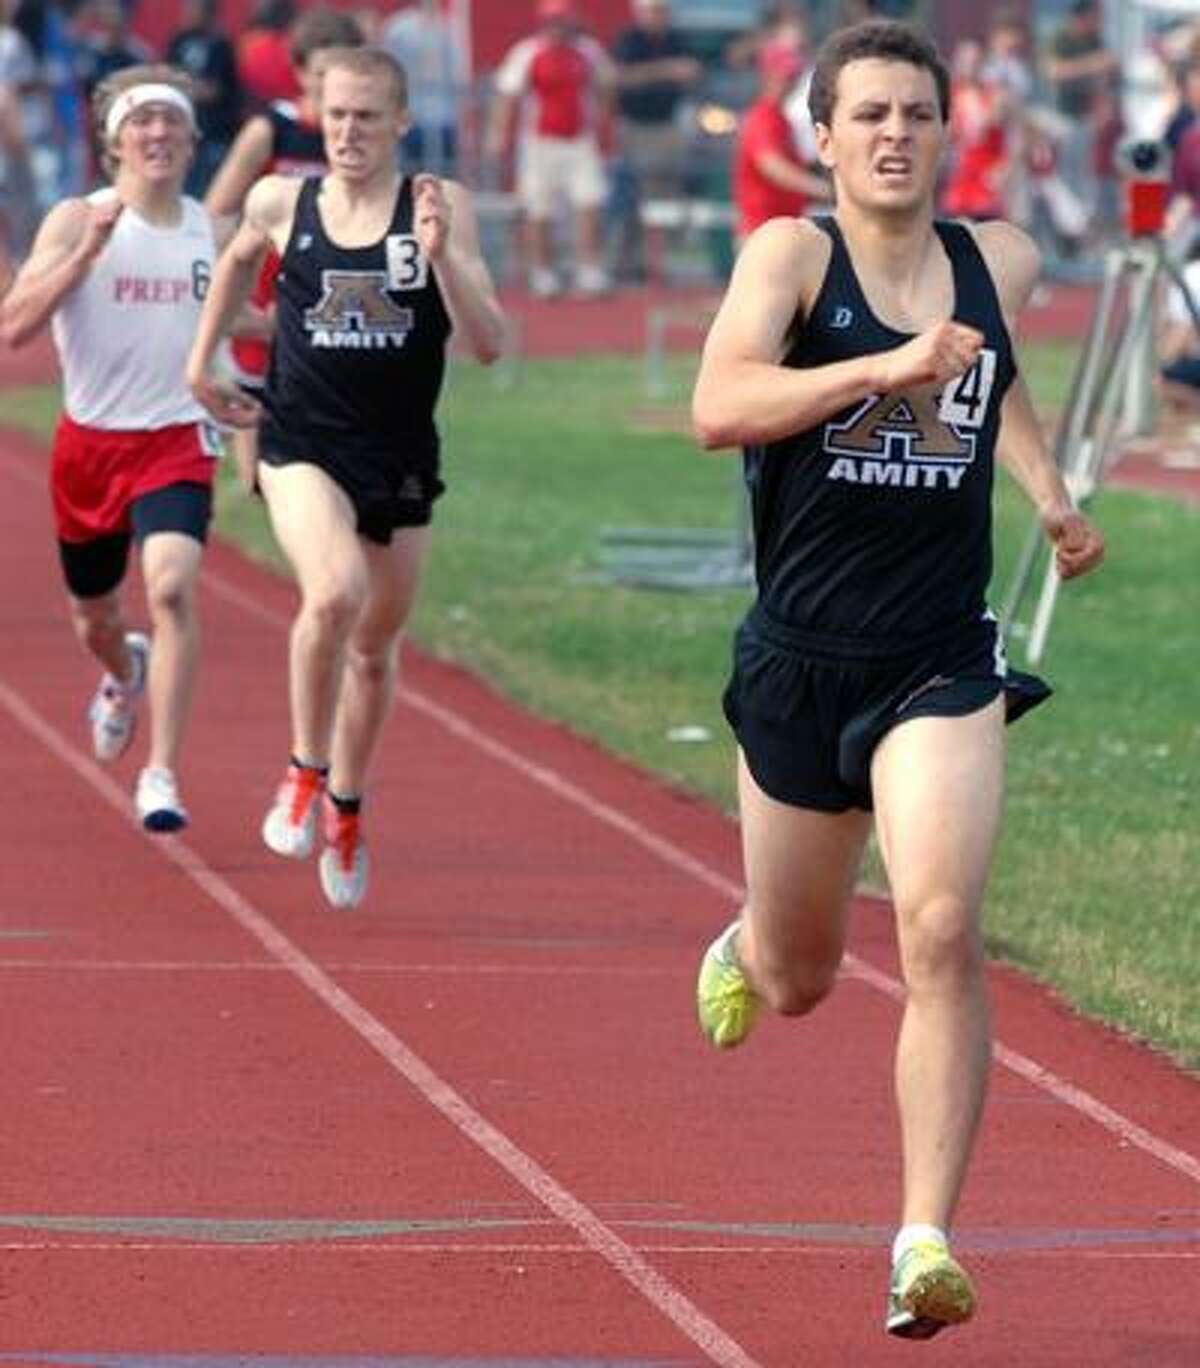 6/3/10 2LL TrackML0606NManchester High School, Class LL track championships: 1600M mens final won by Amity's John Cocco right, second was teammate Ryan Laemel, and third was Fairfield Prep's Connor Rog left. Photo by Mara Lavitt